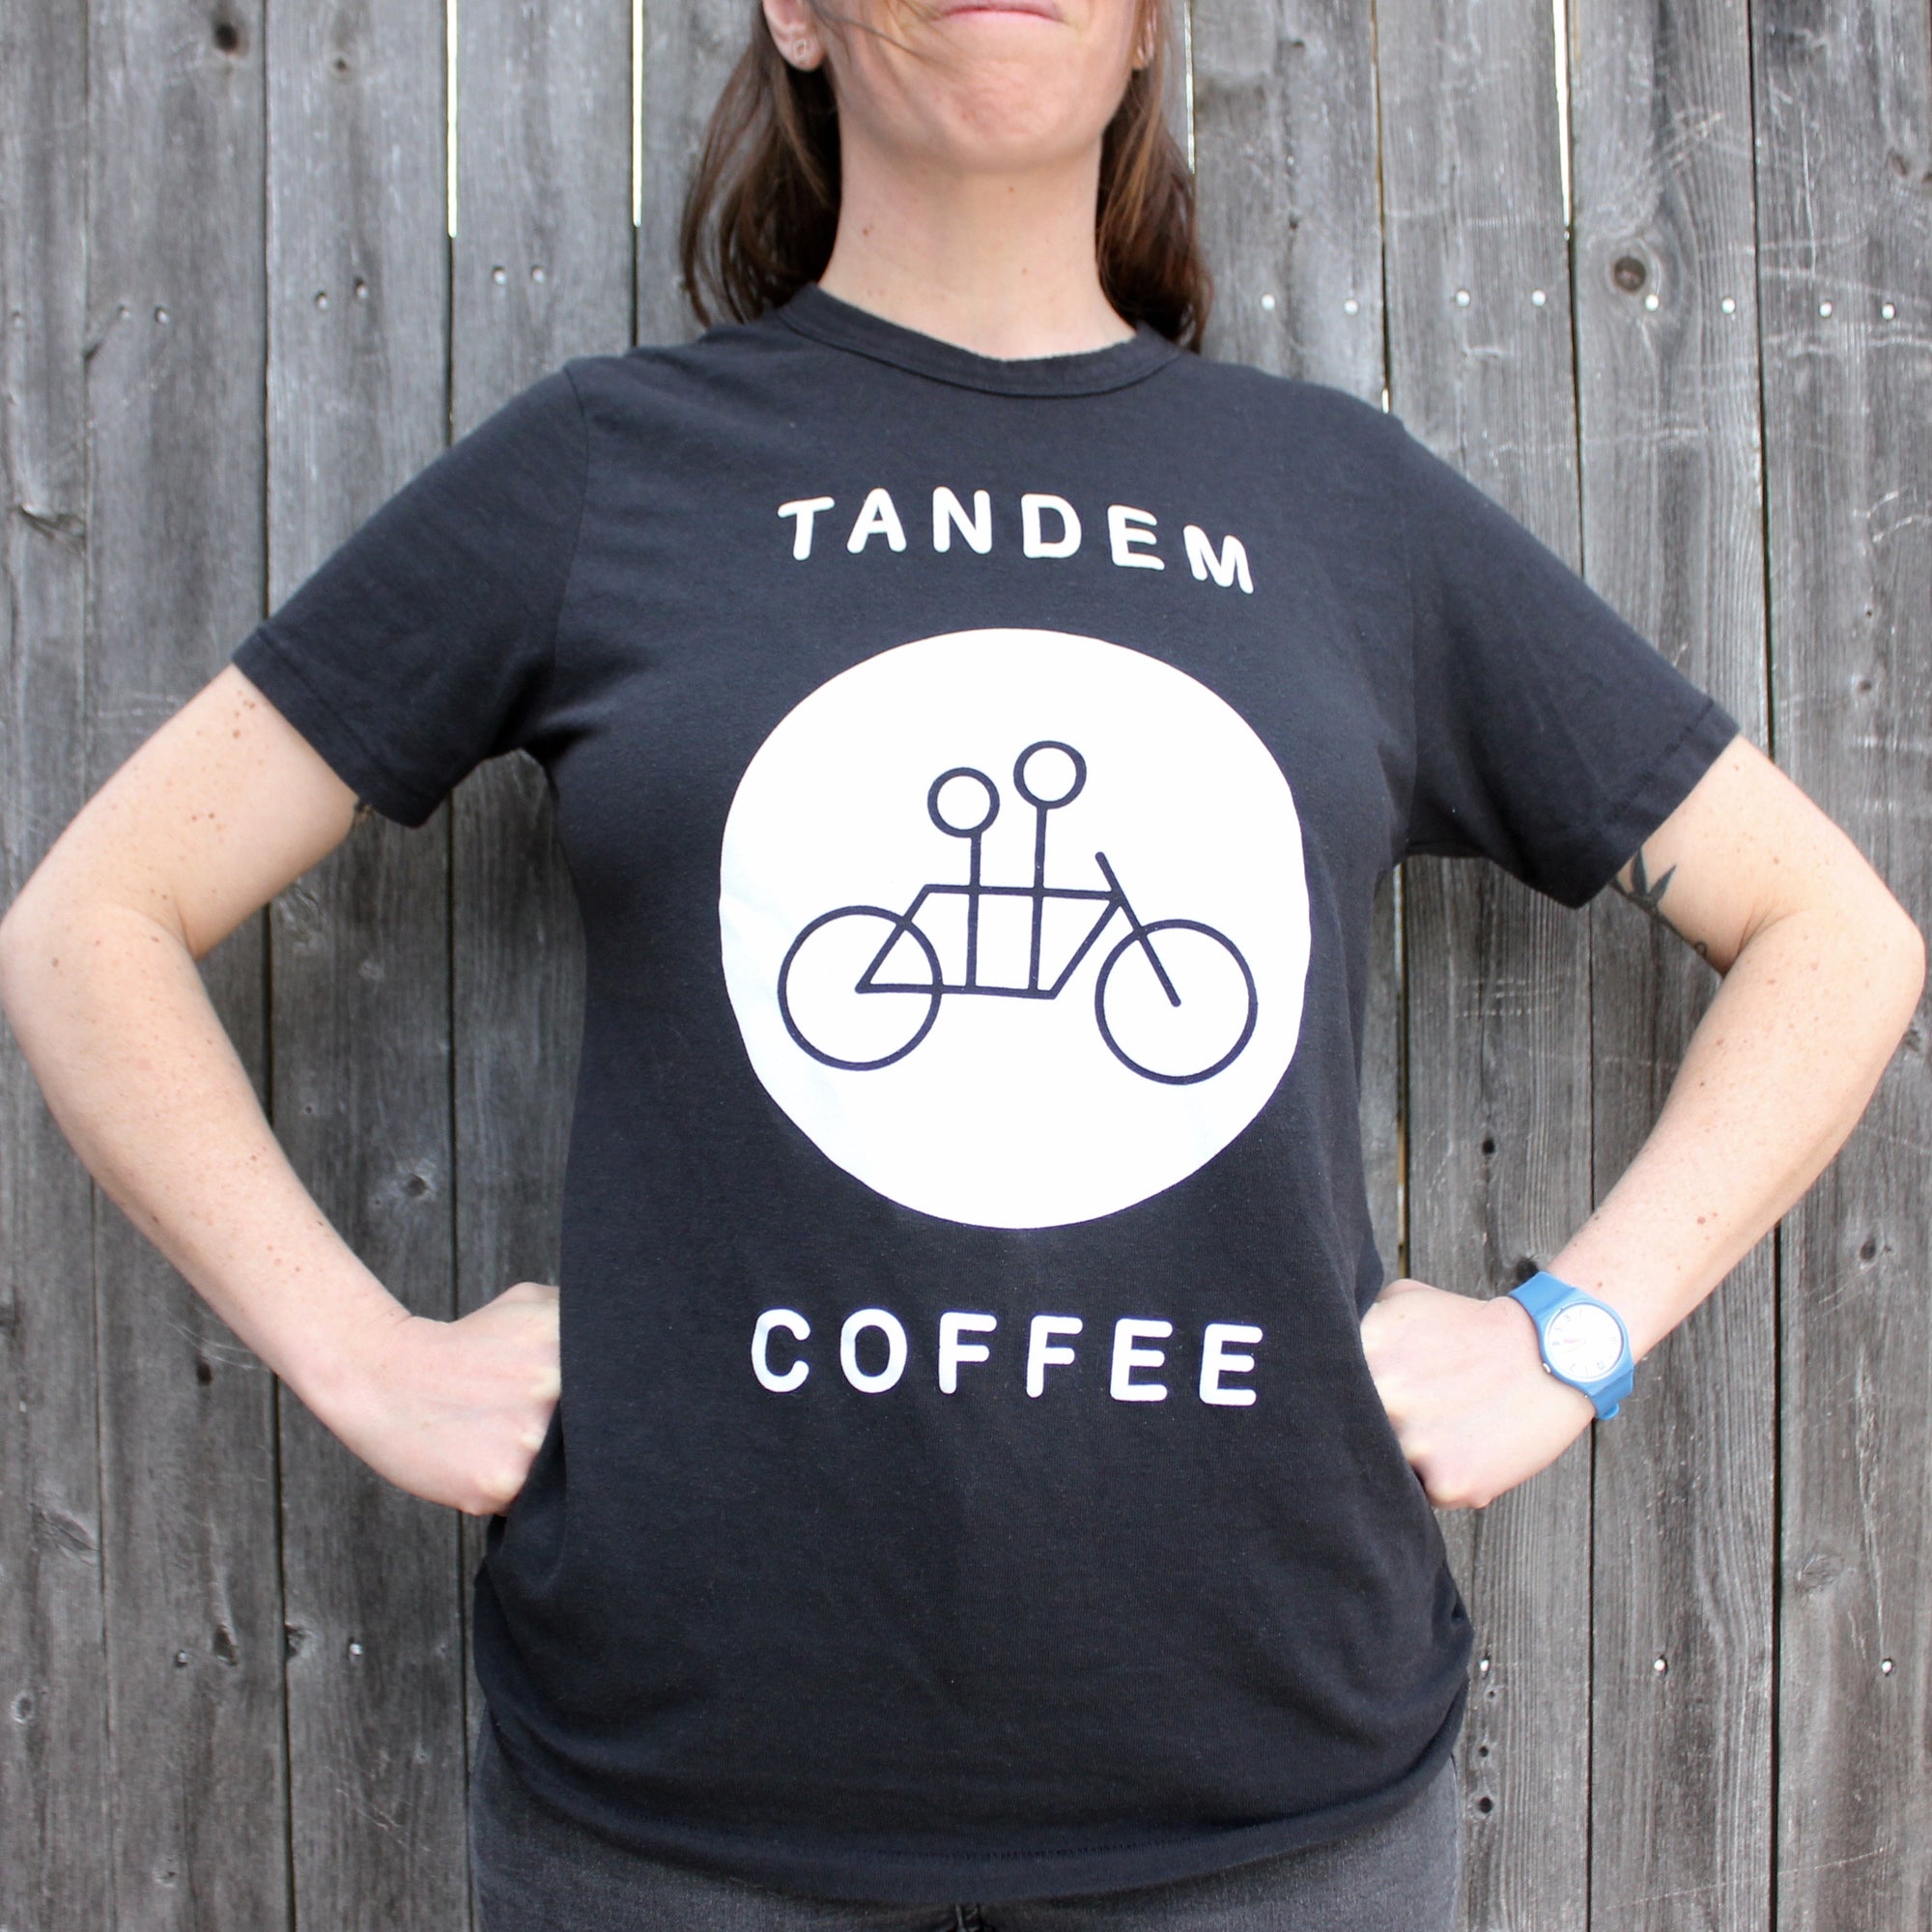 A woman in a black Tandem Coffee Roasters Circle Logo Tee featuring the words "tandem coffee" and a graphic of a tandem bicycle stands against a wooden backdrop.